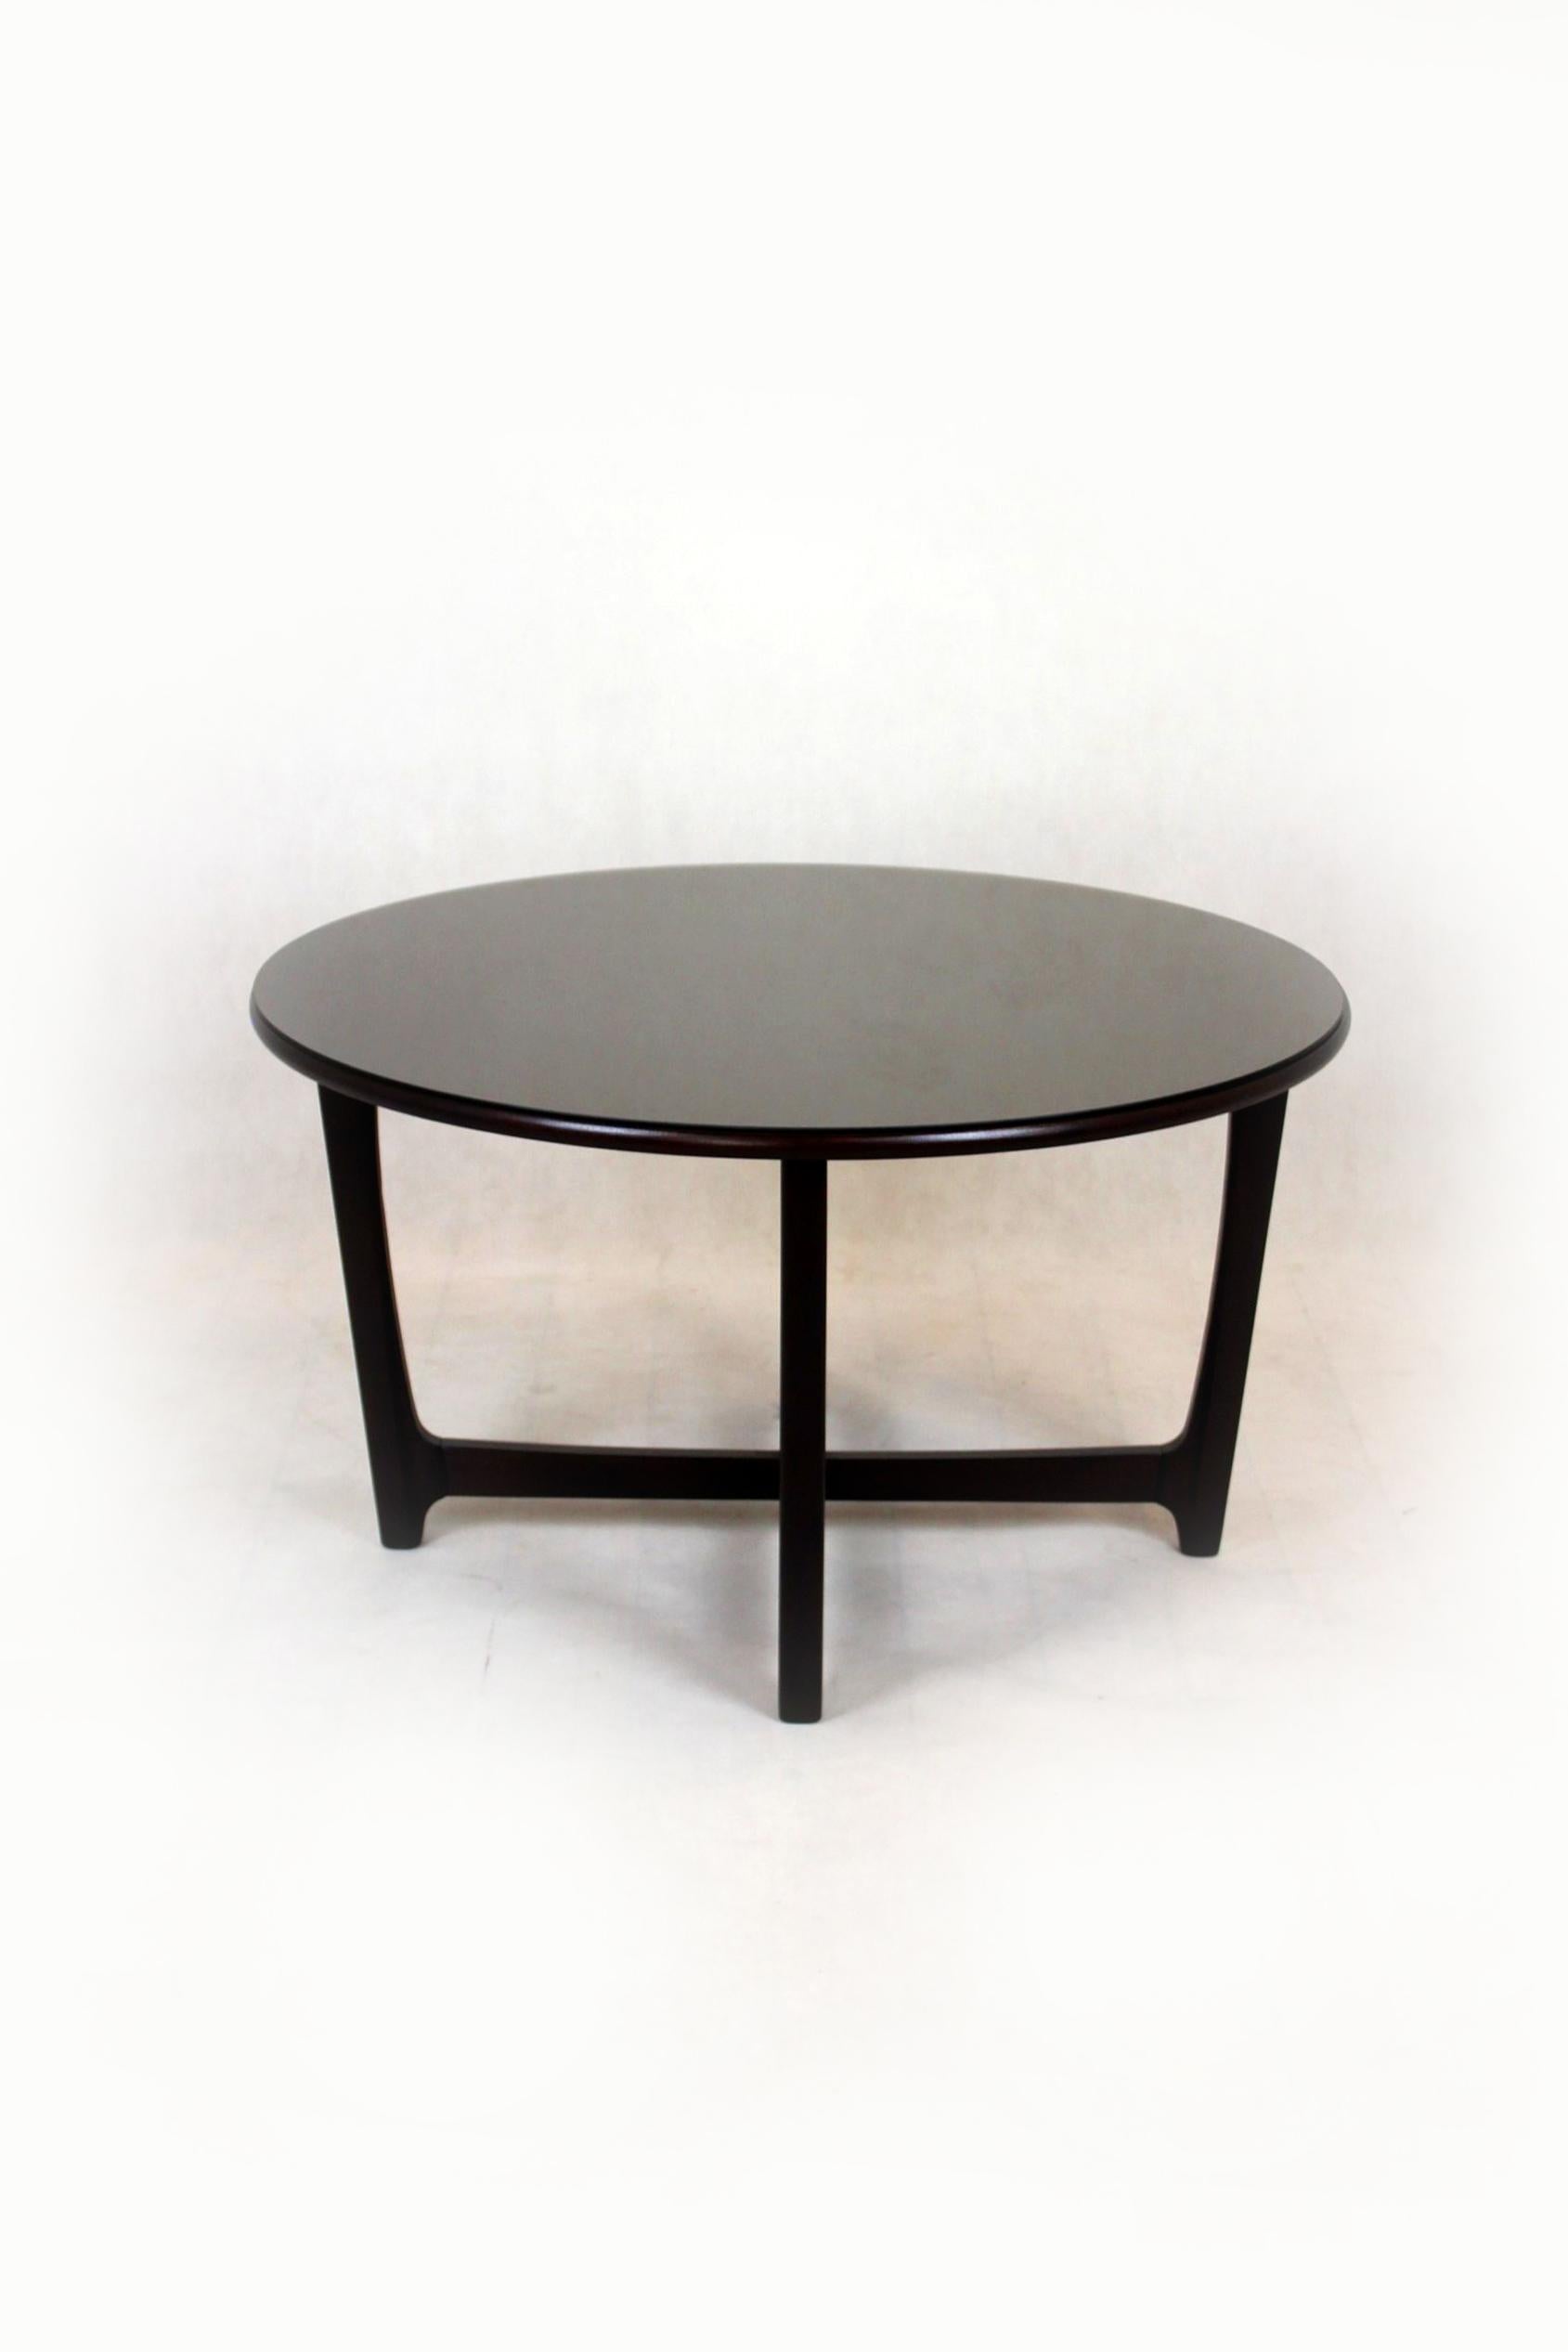 Restored Wooden Round Coffee Table, Czechoslovakia, 1970s For Sale 5